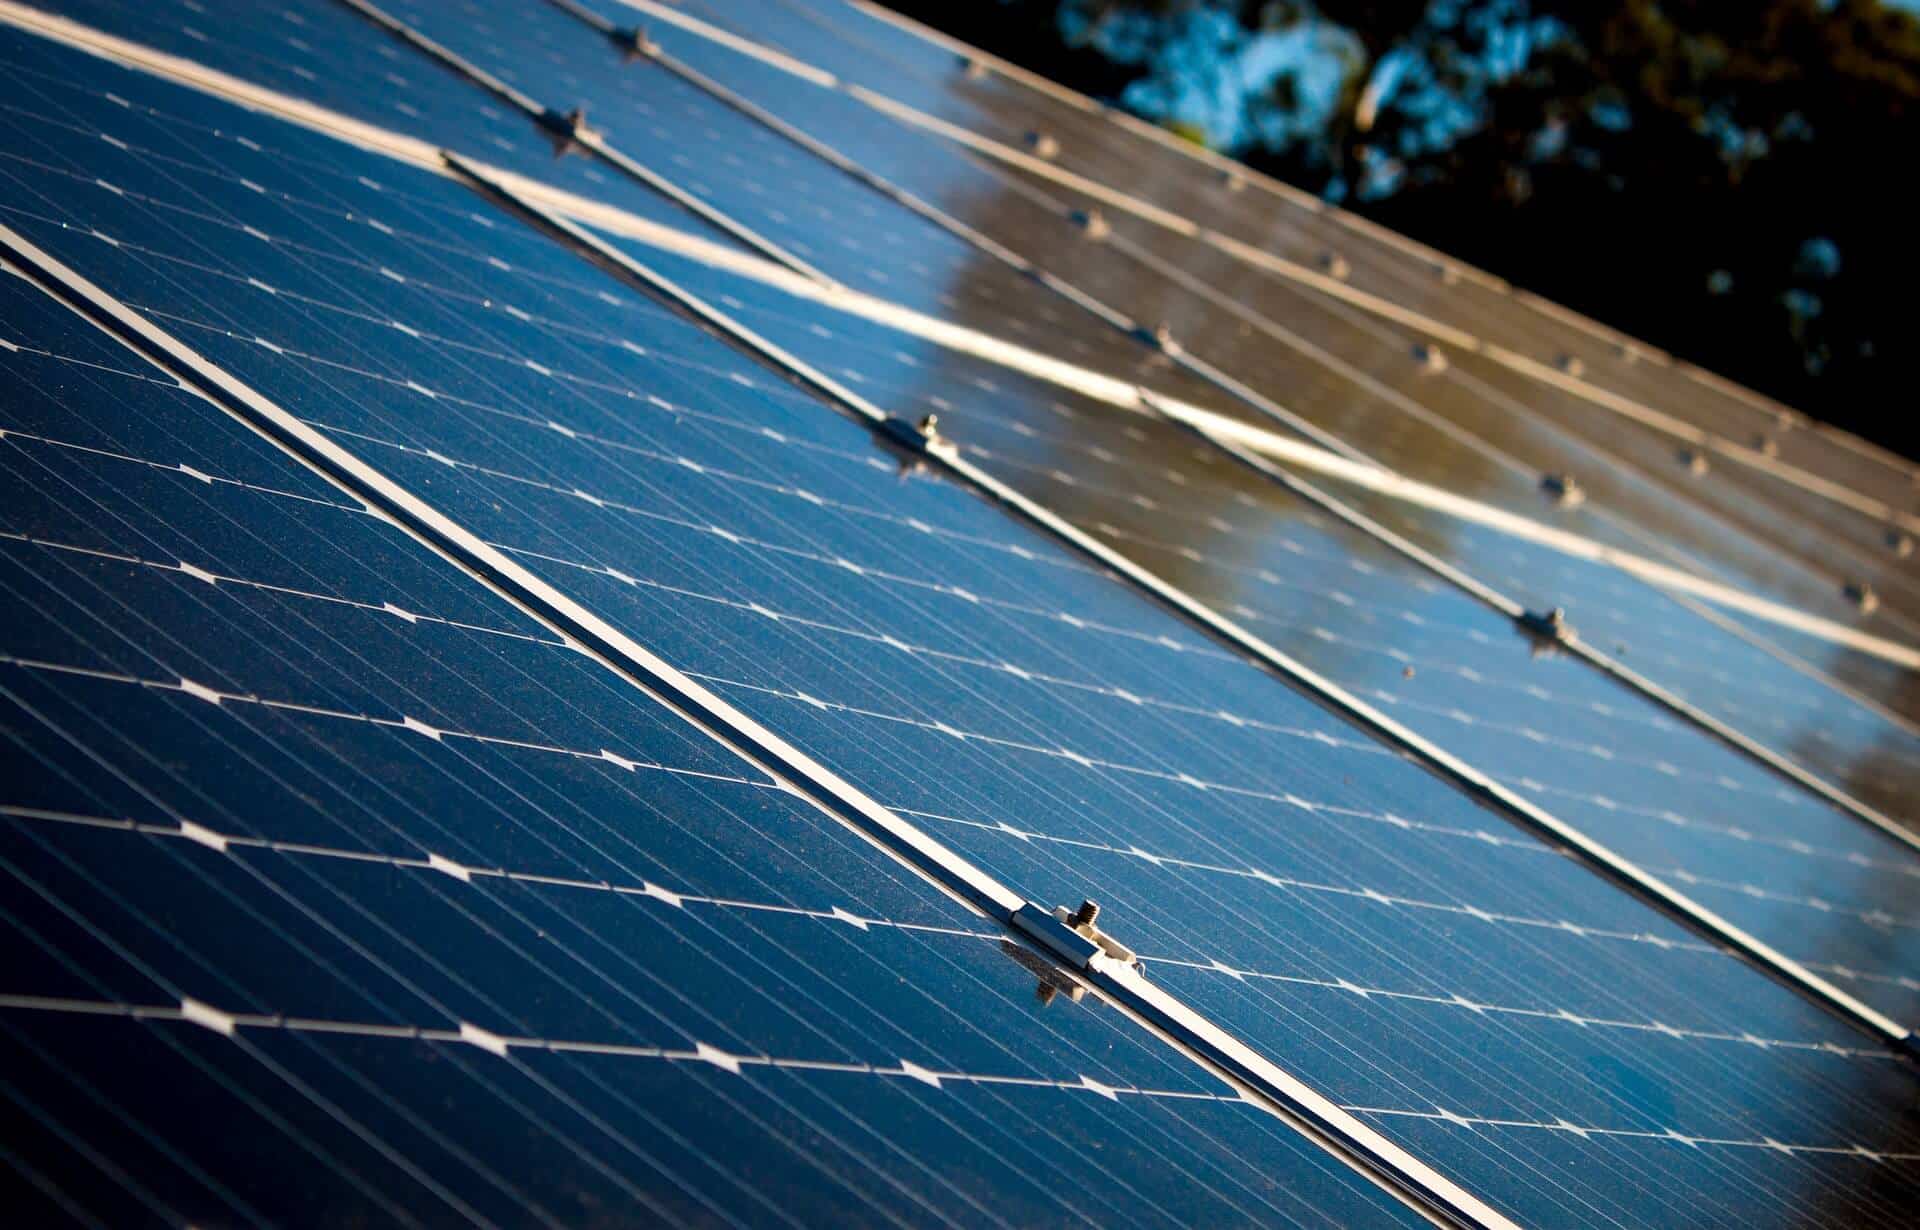 Installing solar panels in Texas: What To Know